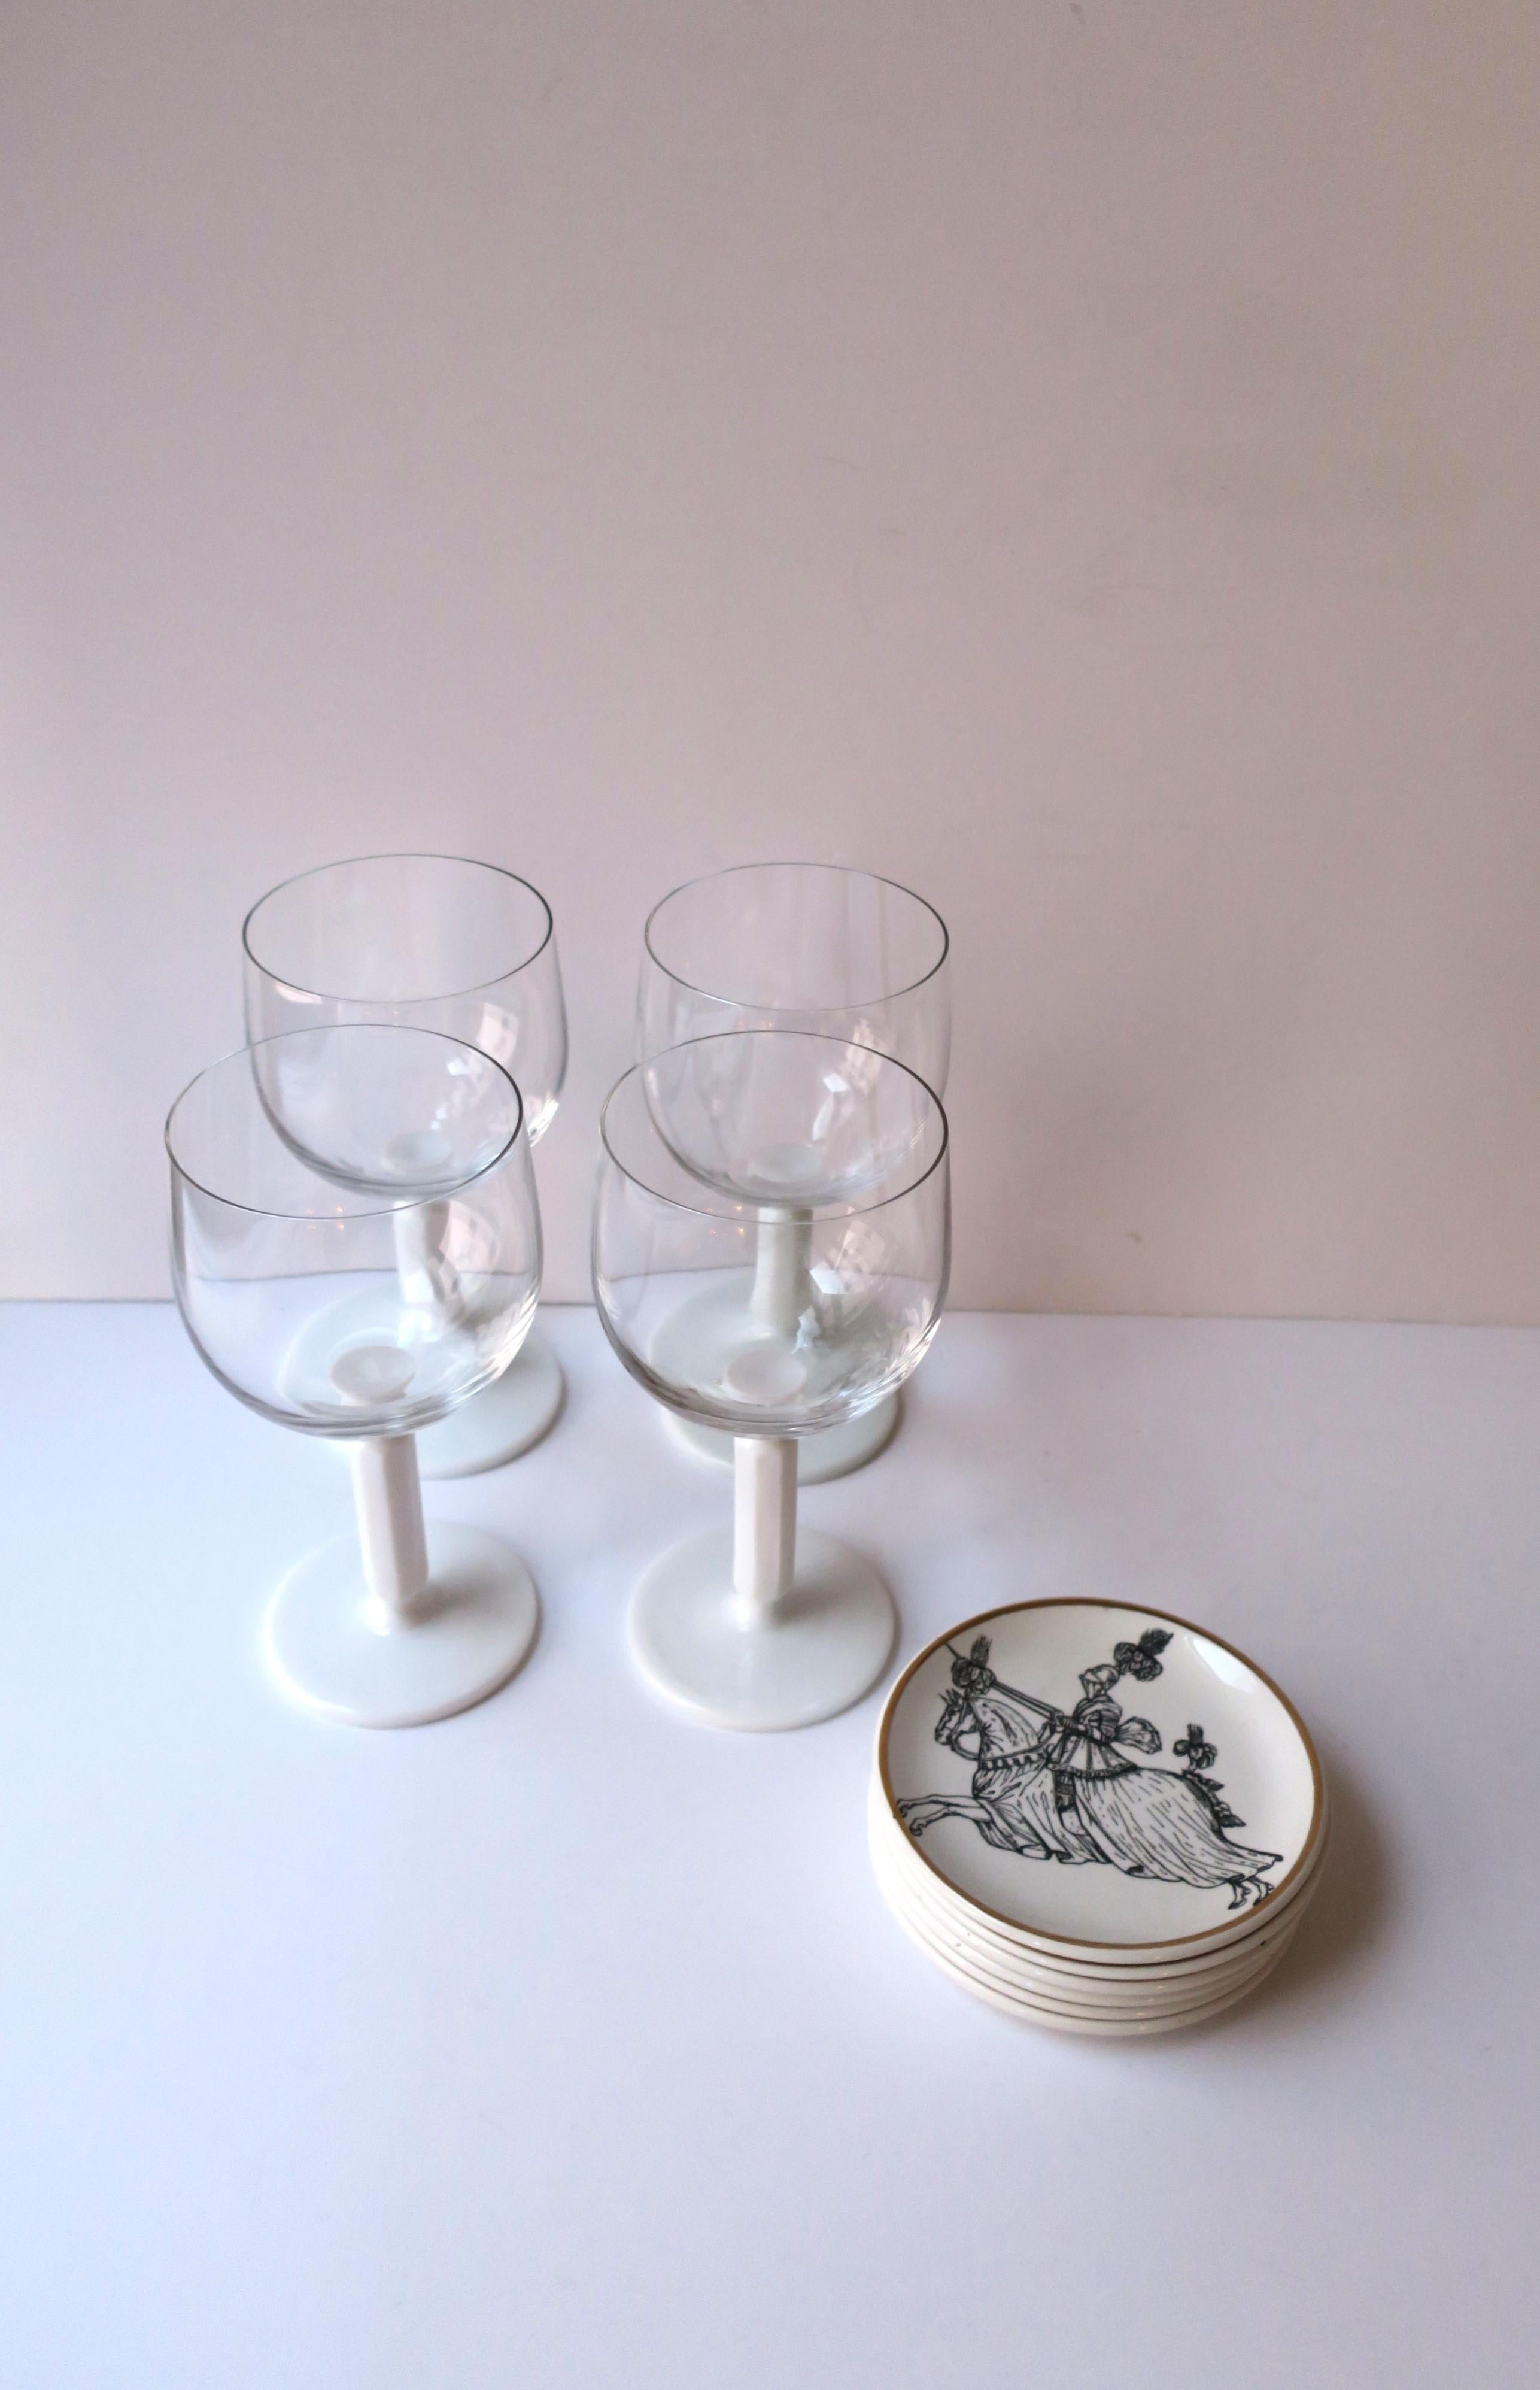 Rosenthal Studio-Line Wine or Cocktail Glasses with White Glass Stem, Set of 4 In Good Condition For Sale In New York, NY